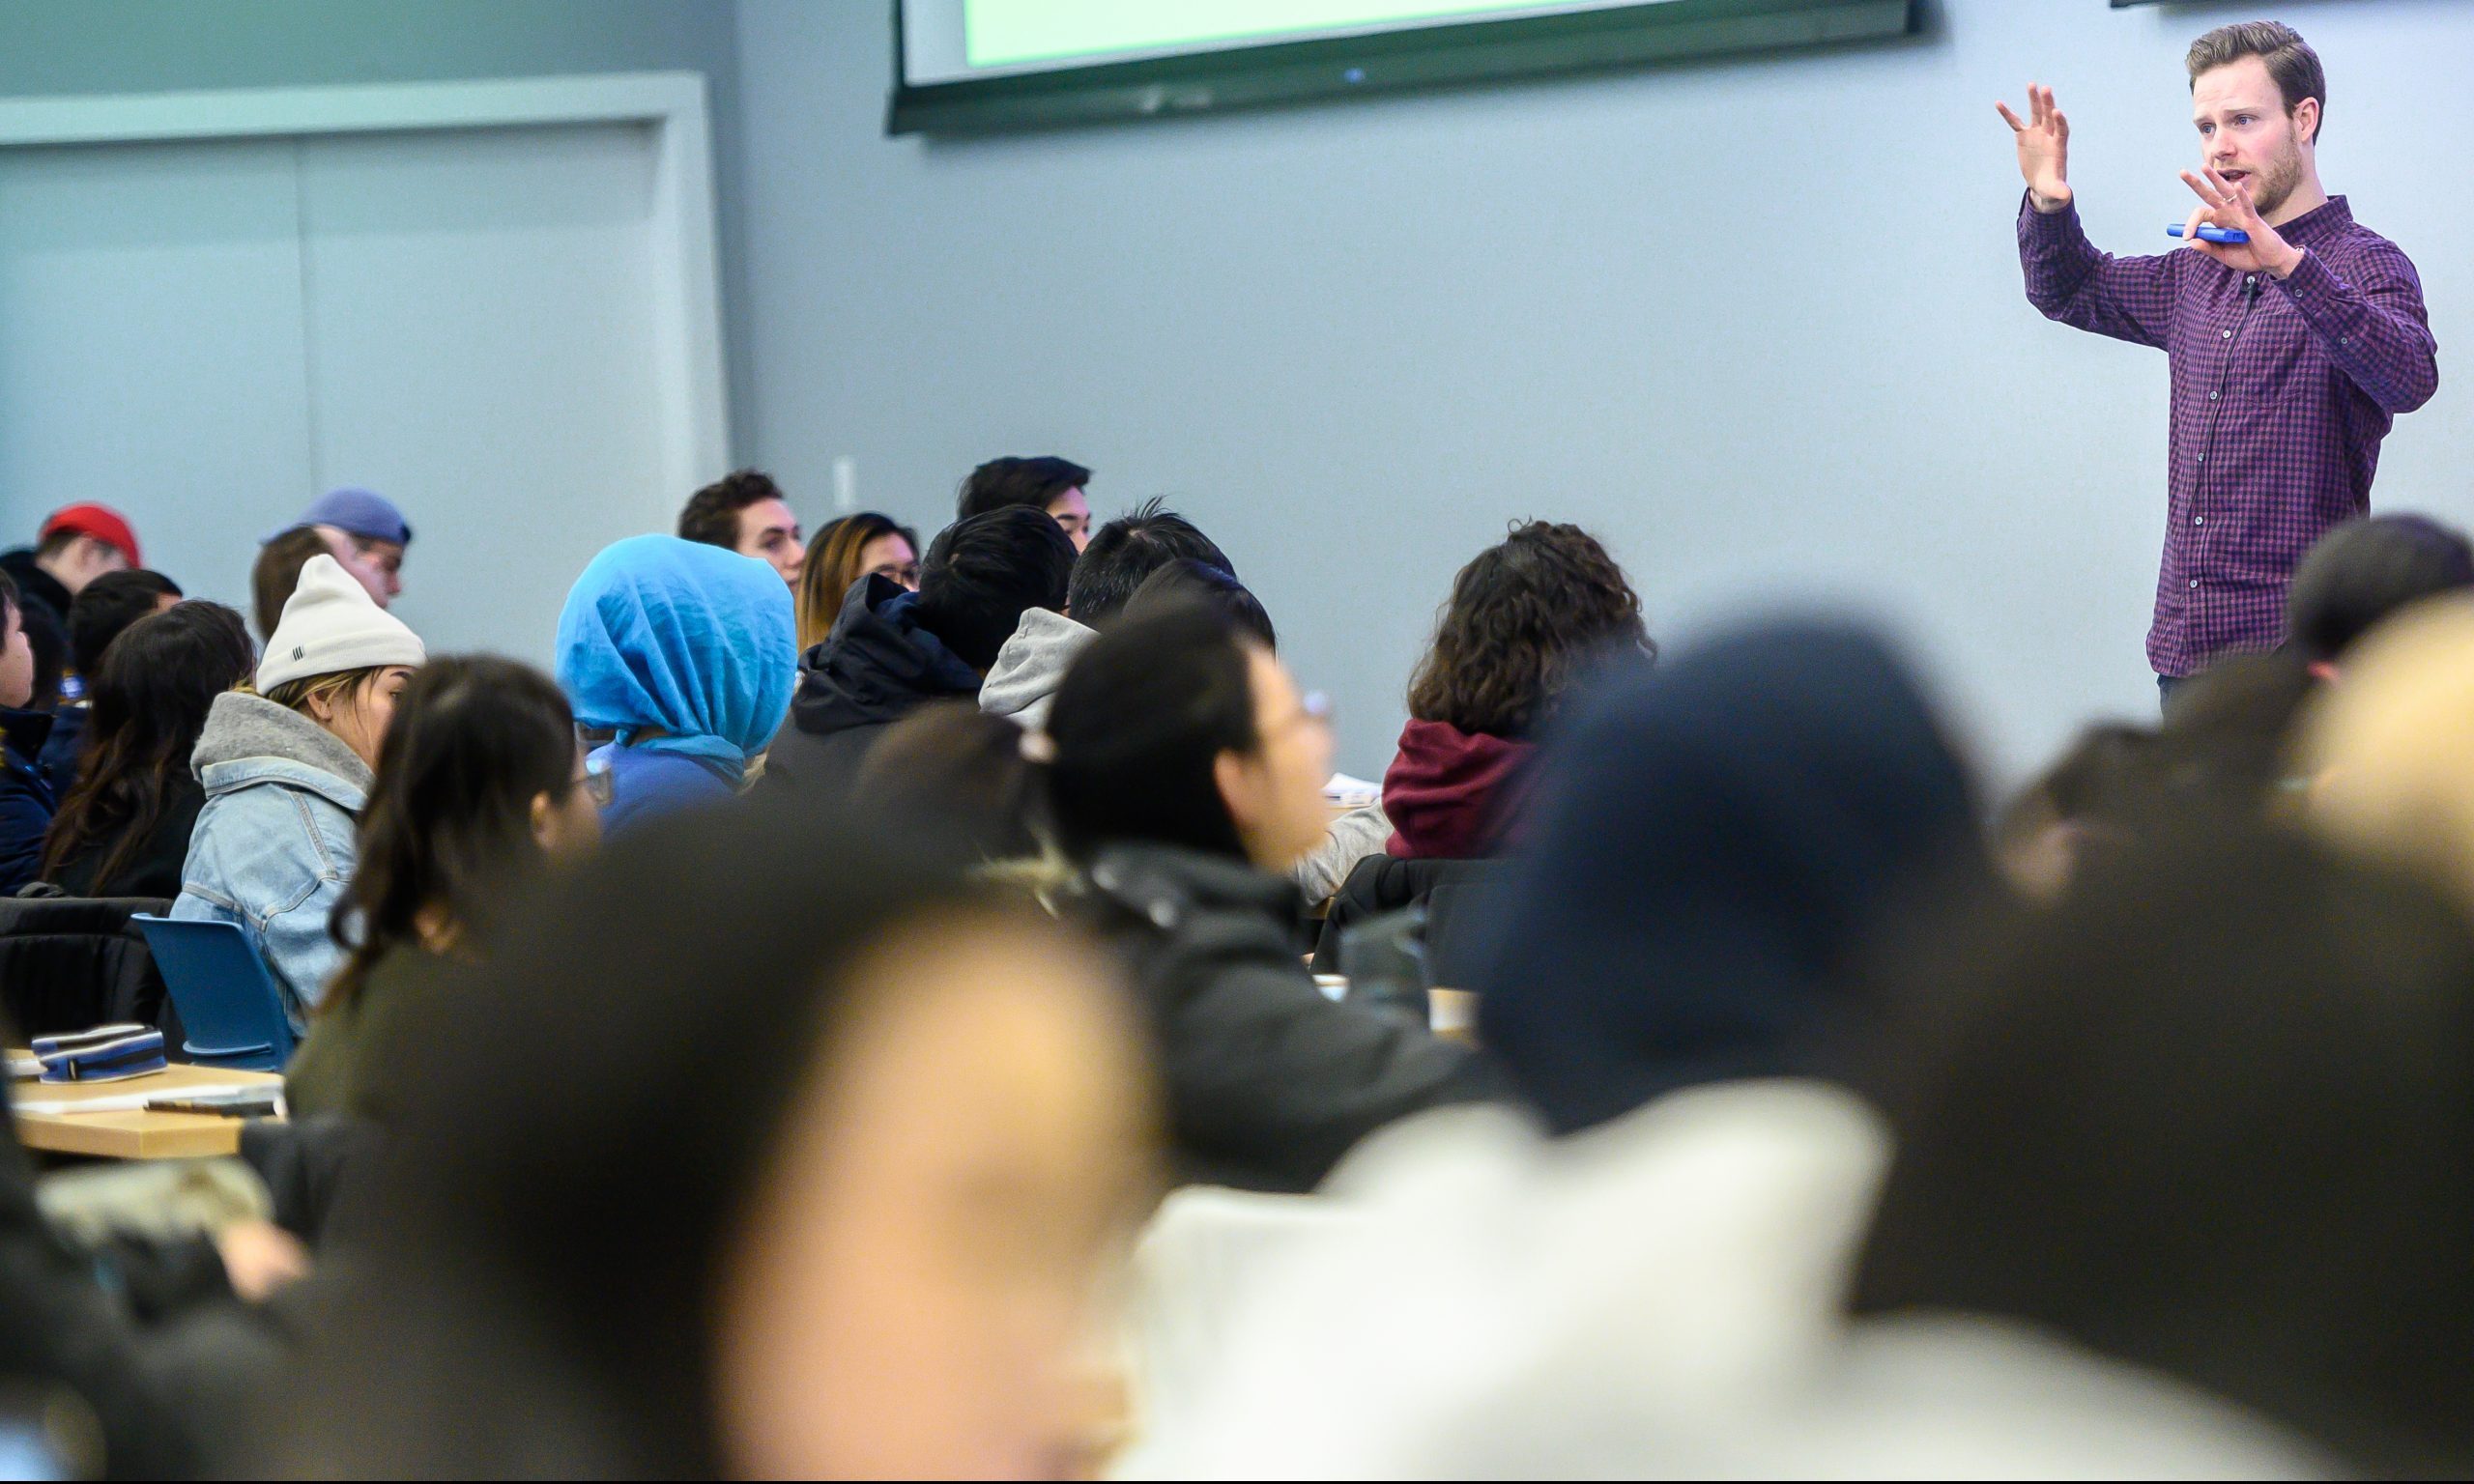 A UBC professor standing at the front of a room teaching students.